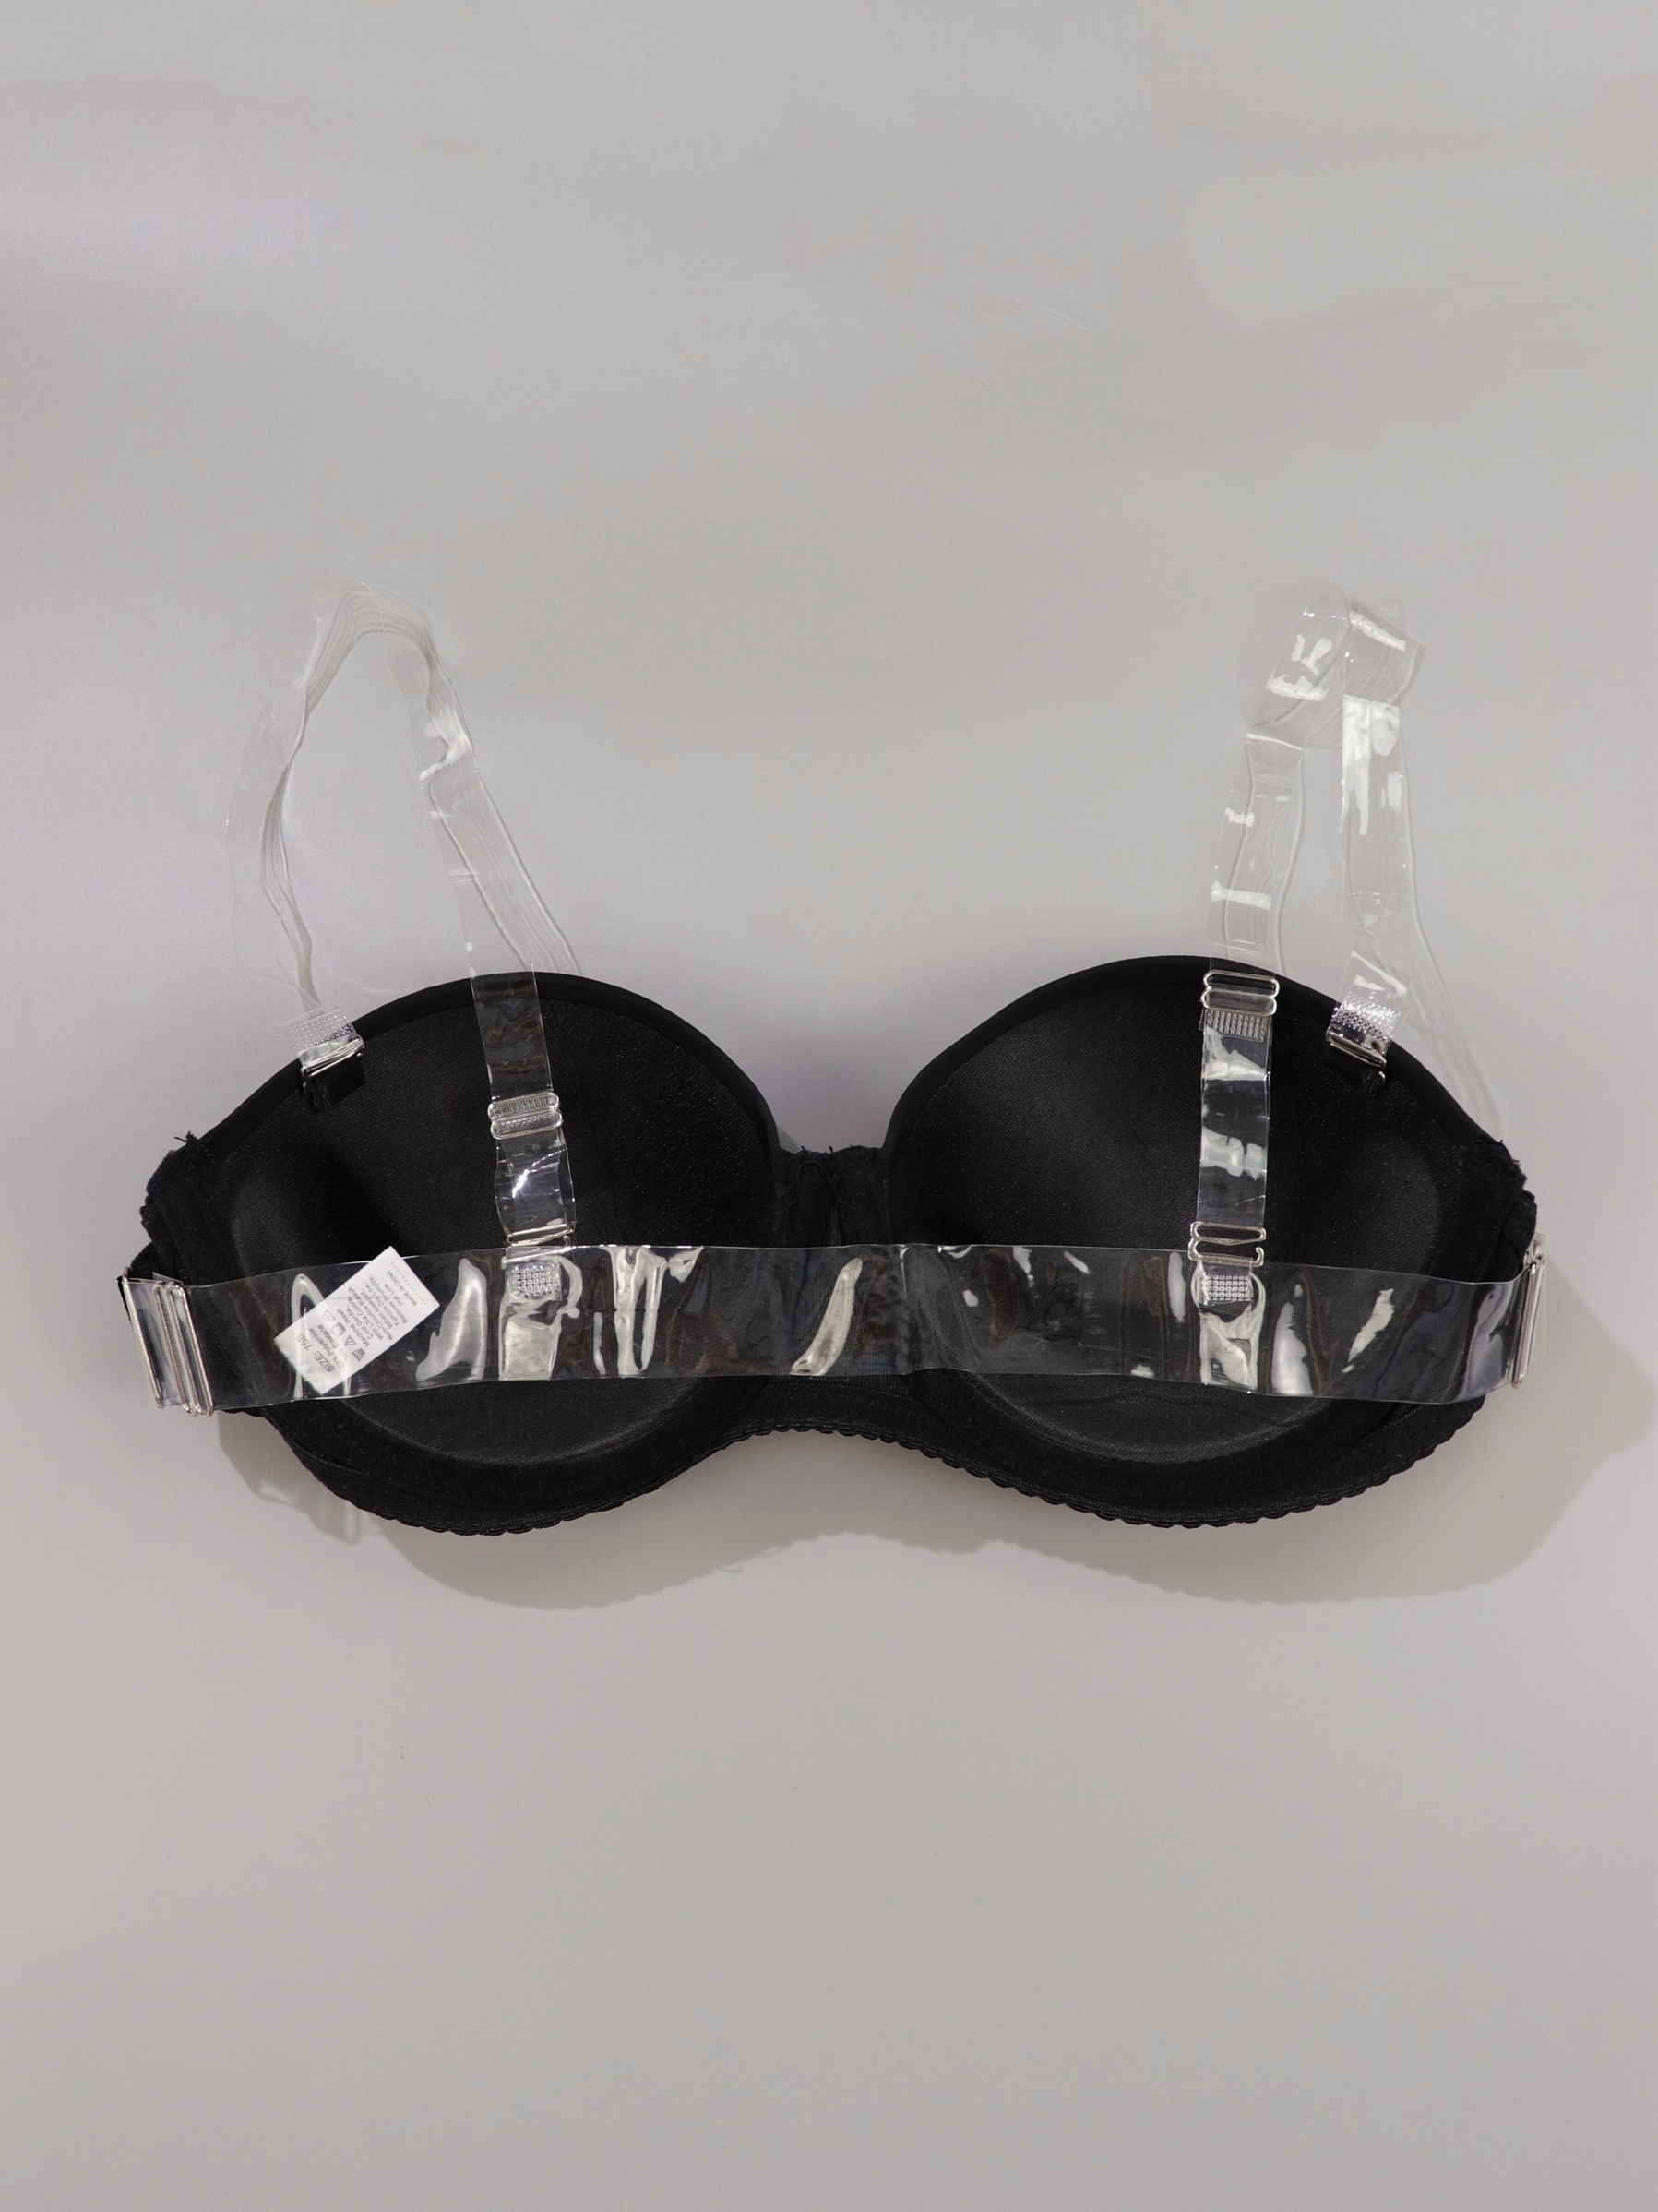 Strapless Push Up Lace Bras with Clear Strap